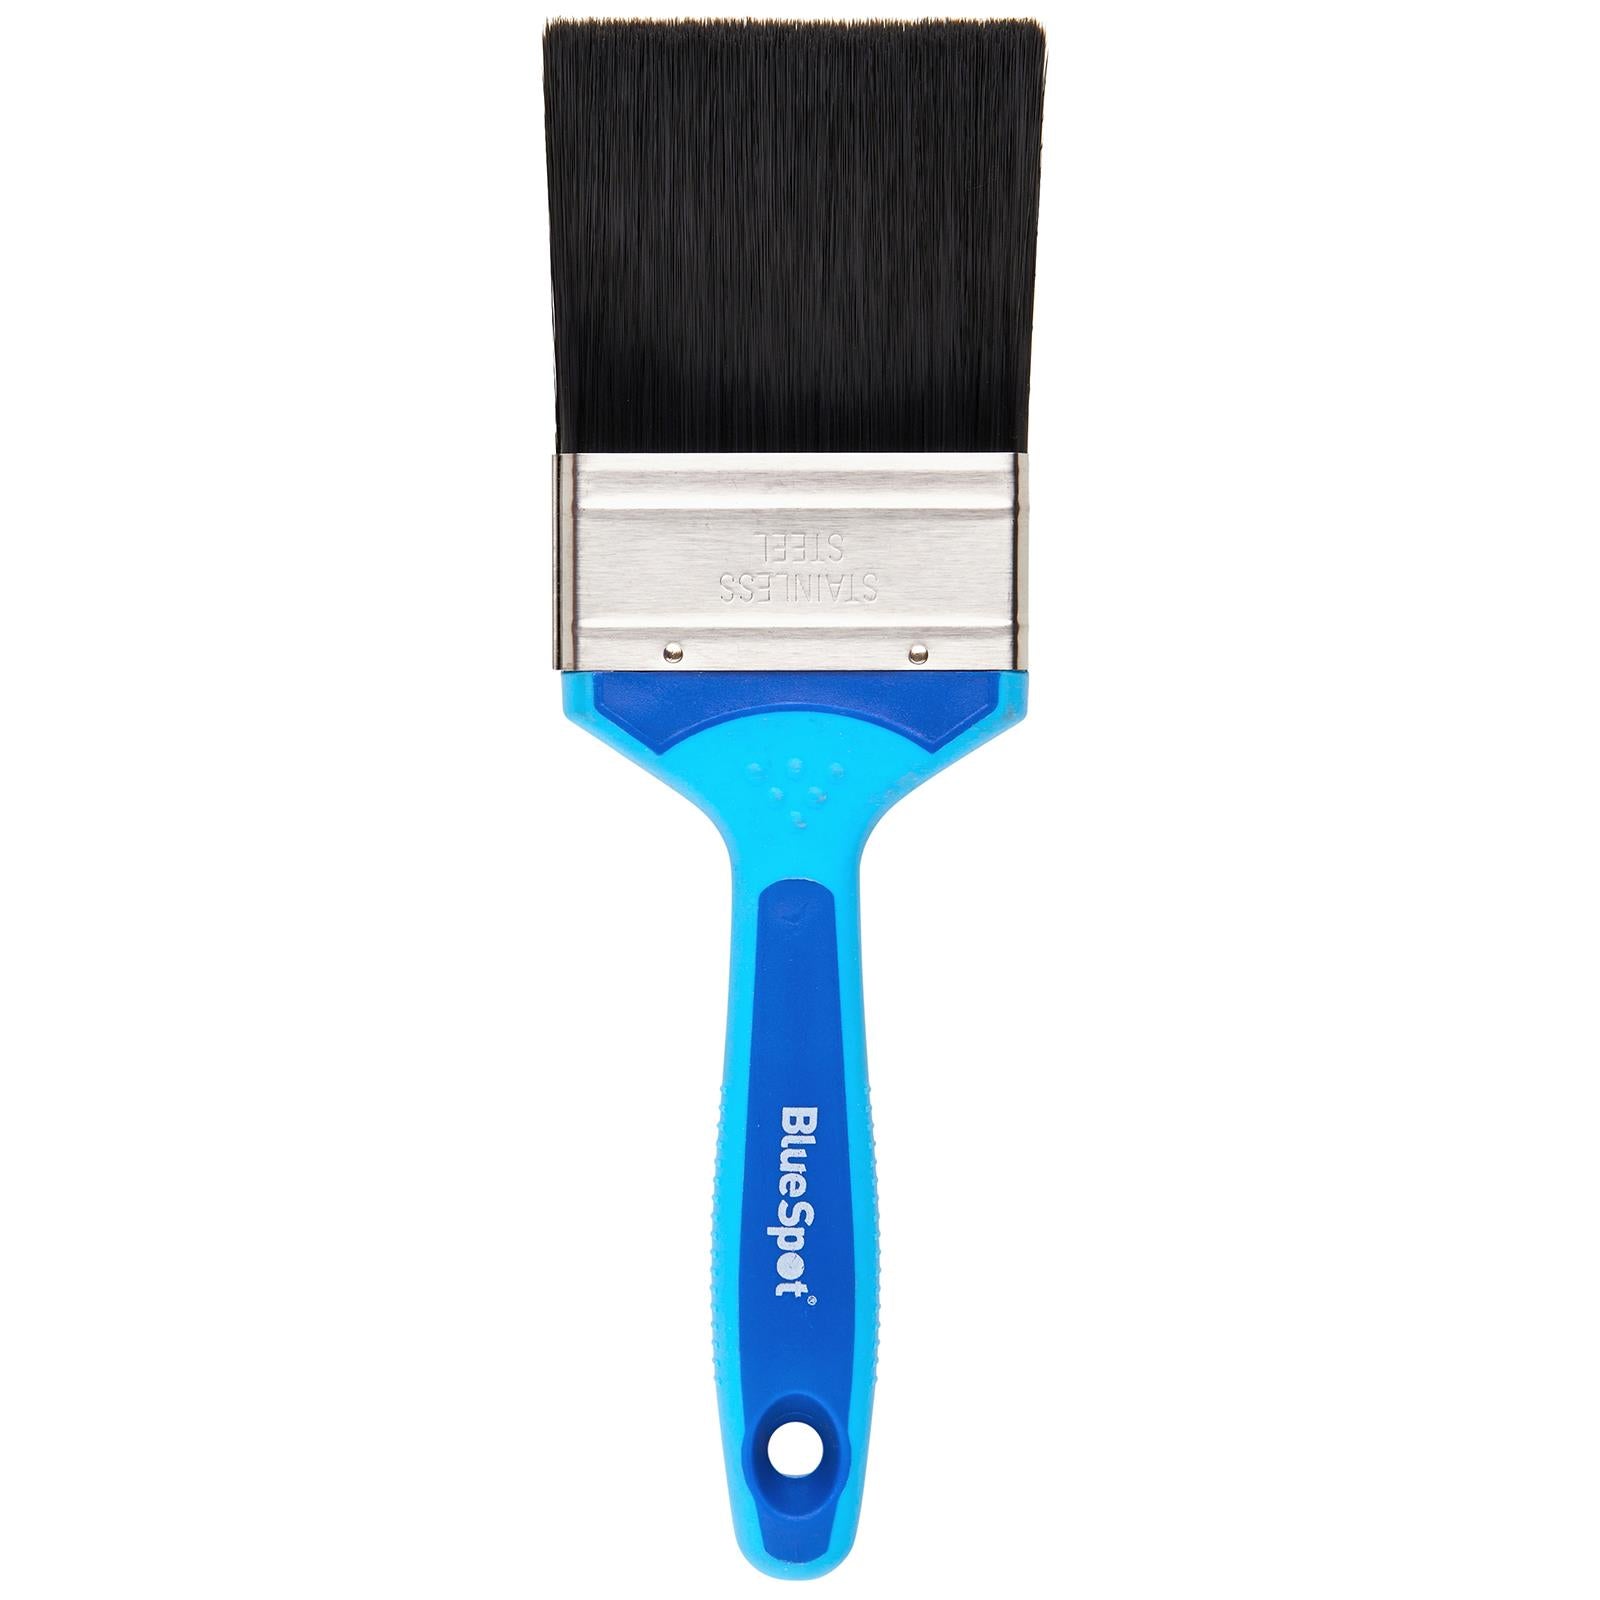 BlueSpot Synthetic Paint Brush with Soft Grip Handle 75mm (3")